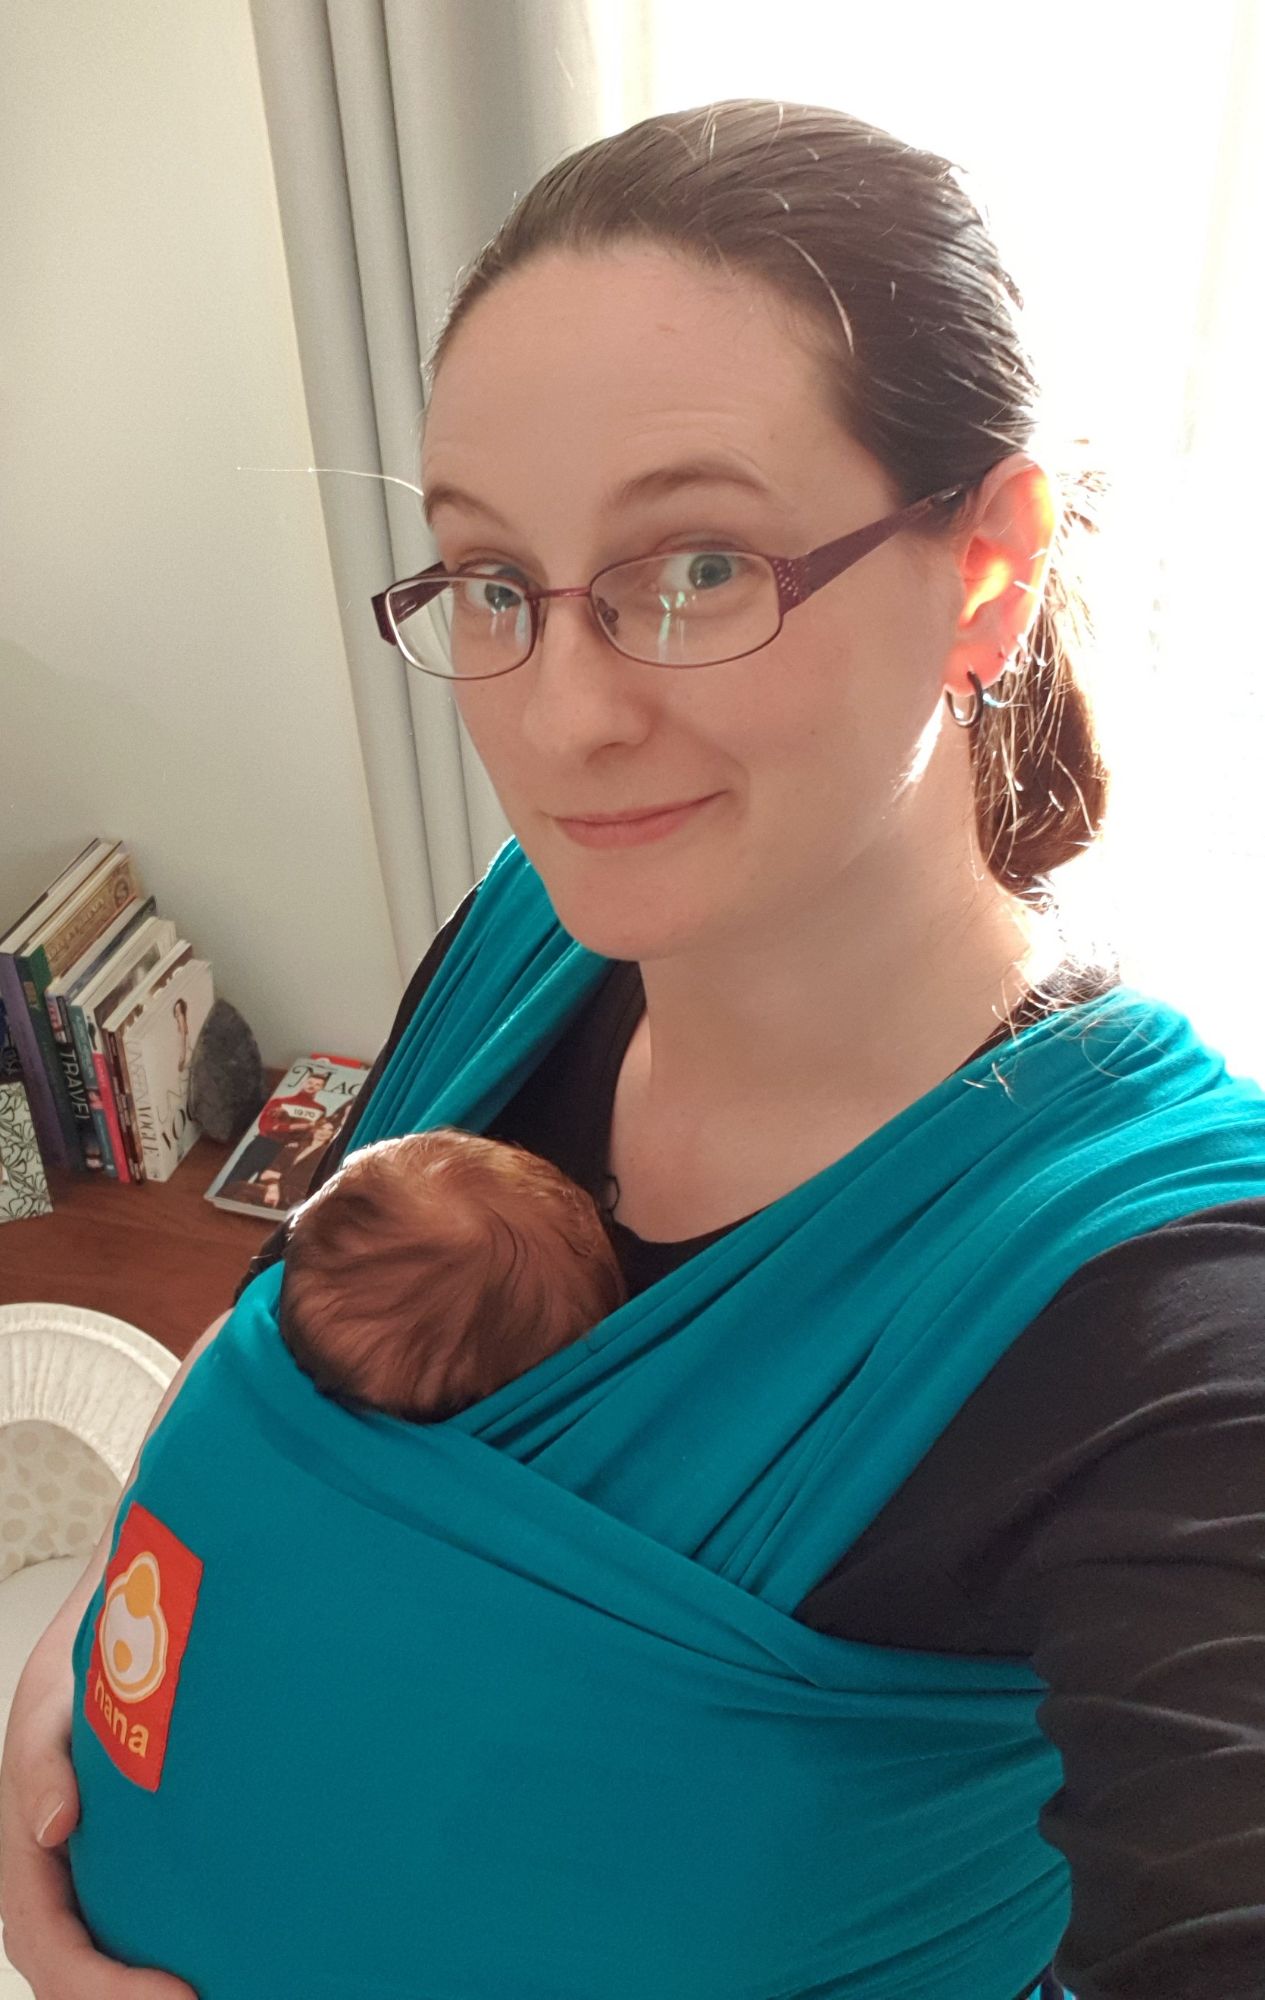 Caz is wearing a newborn baby in a teal stretchy sling. She is smiling at the camera.